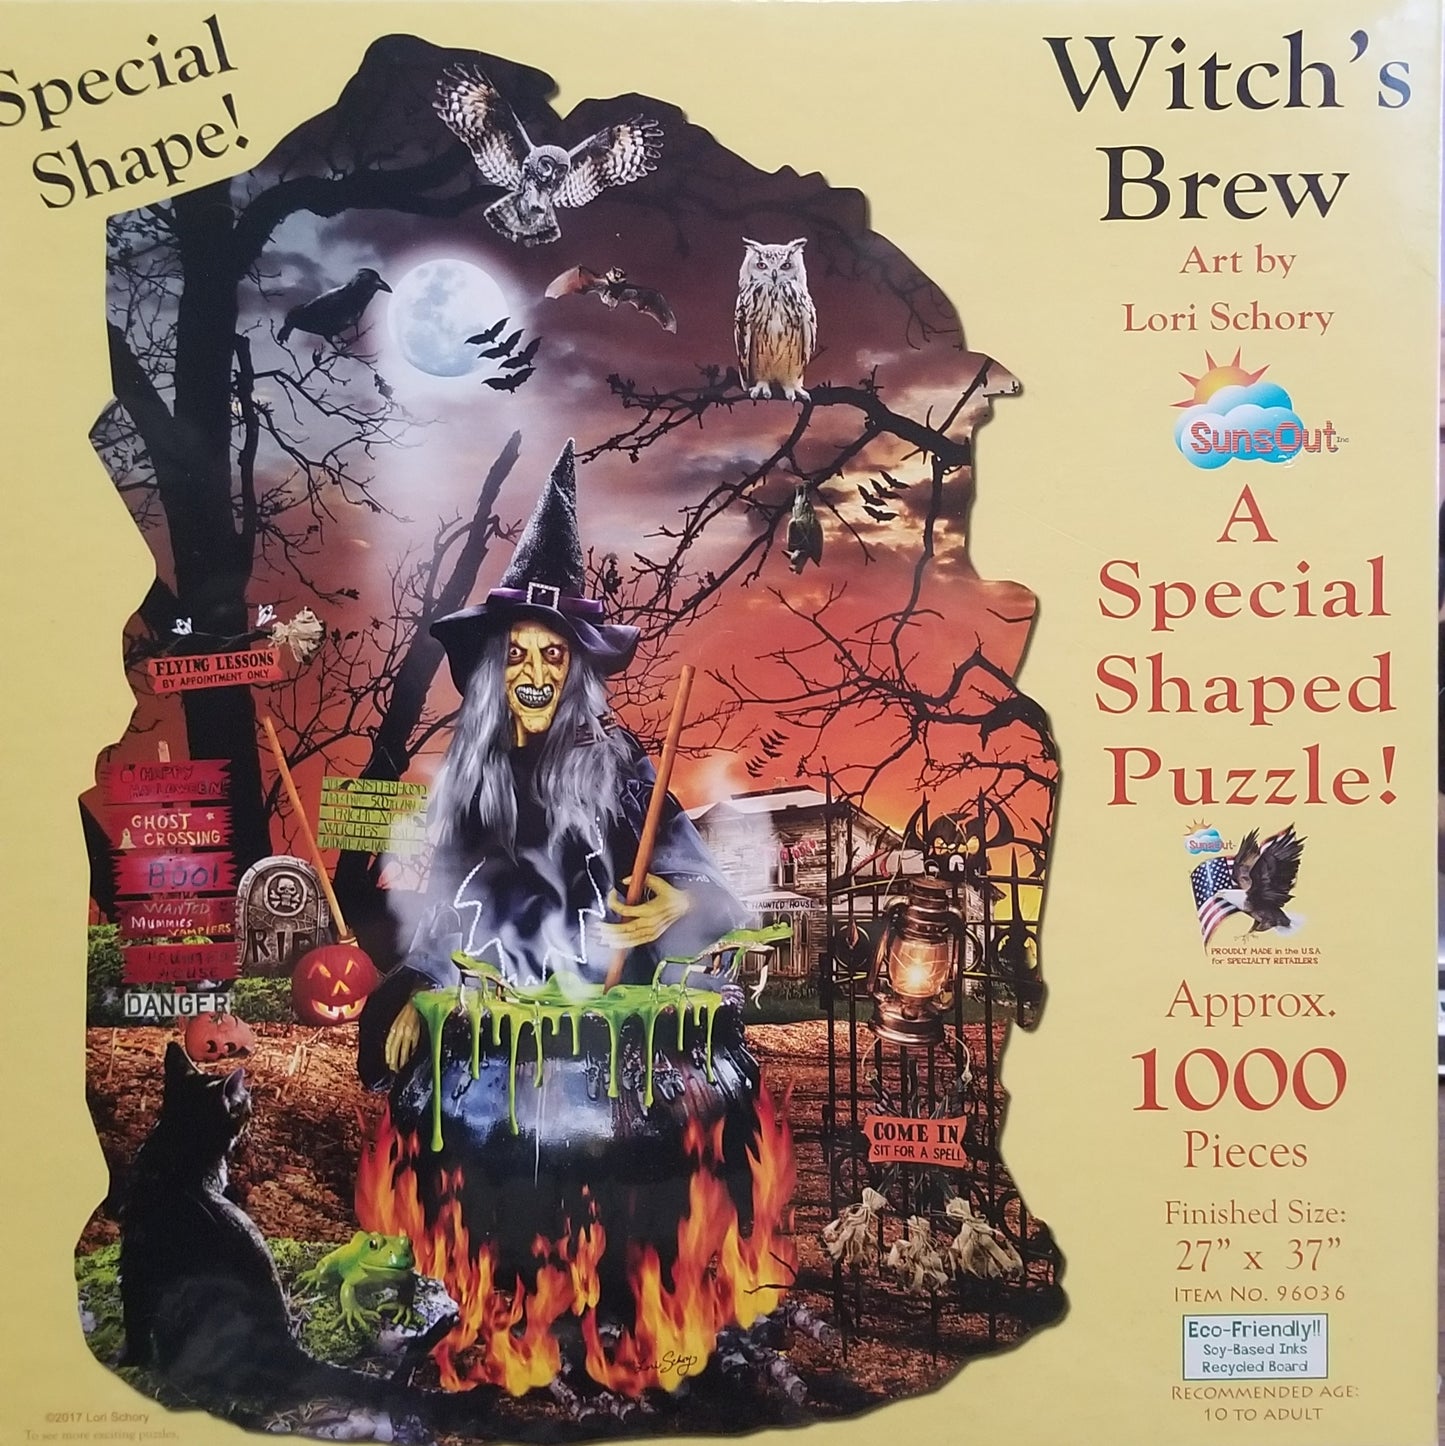 Witch's Brew af Lori Schory, 1000 brikker puslespil